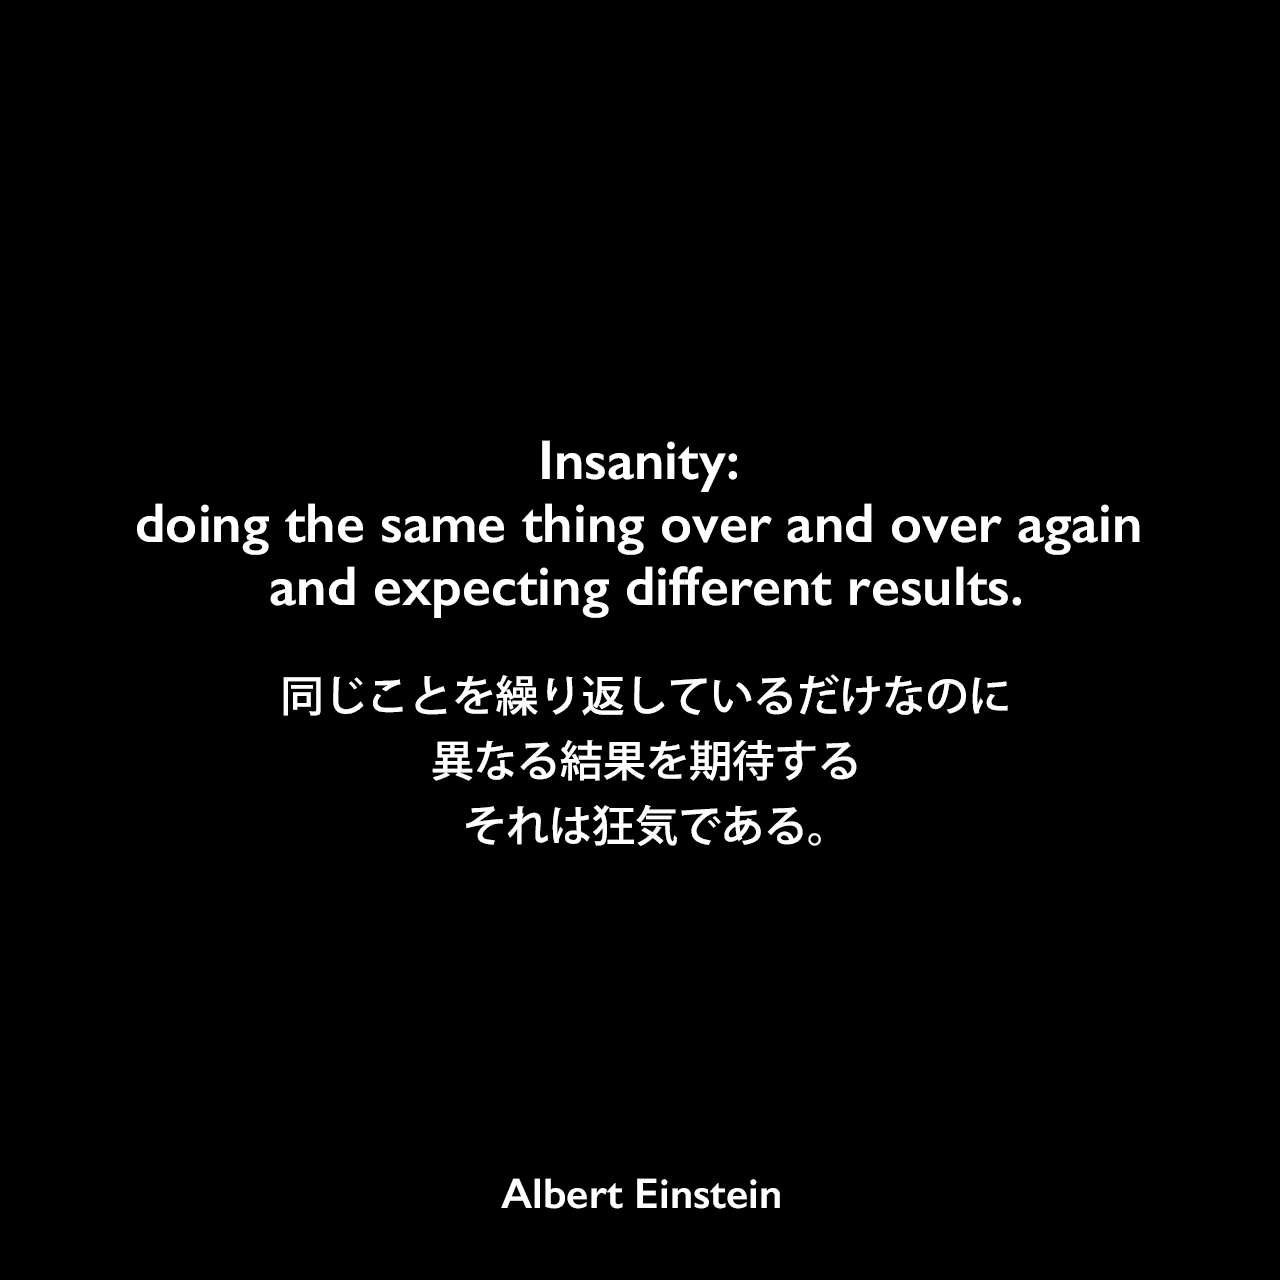 Insanity: doing the same thing over and over again and expecting different results.同じことを繰り返しているだけなのに、異なる結果を期待する、それは狂気である。